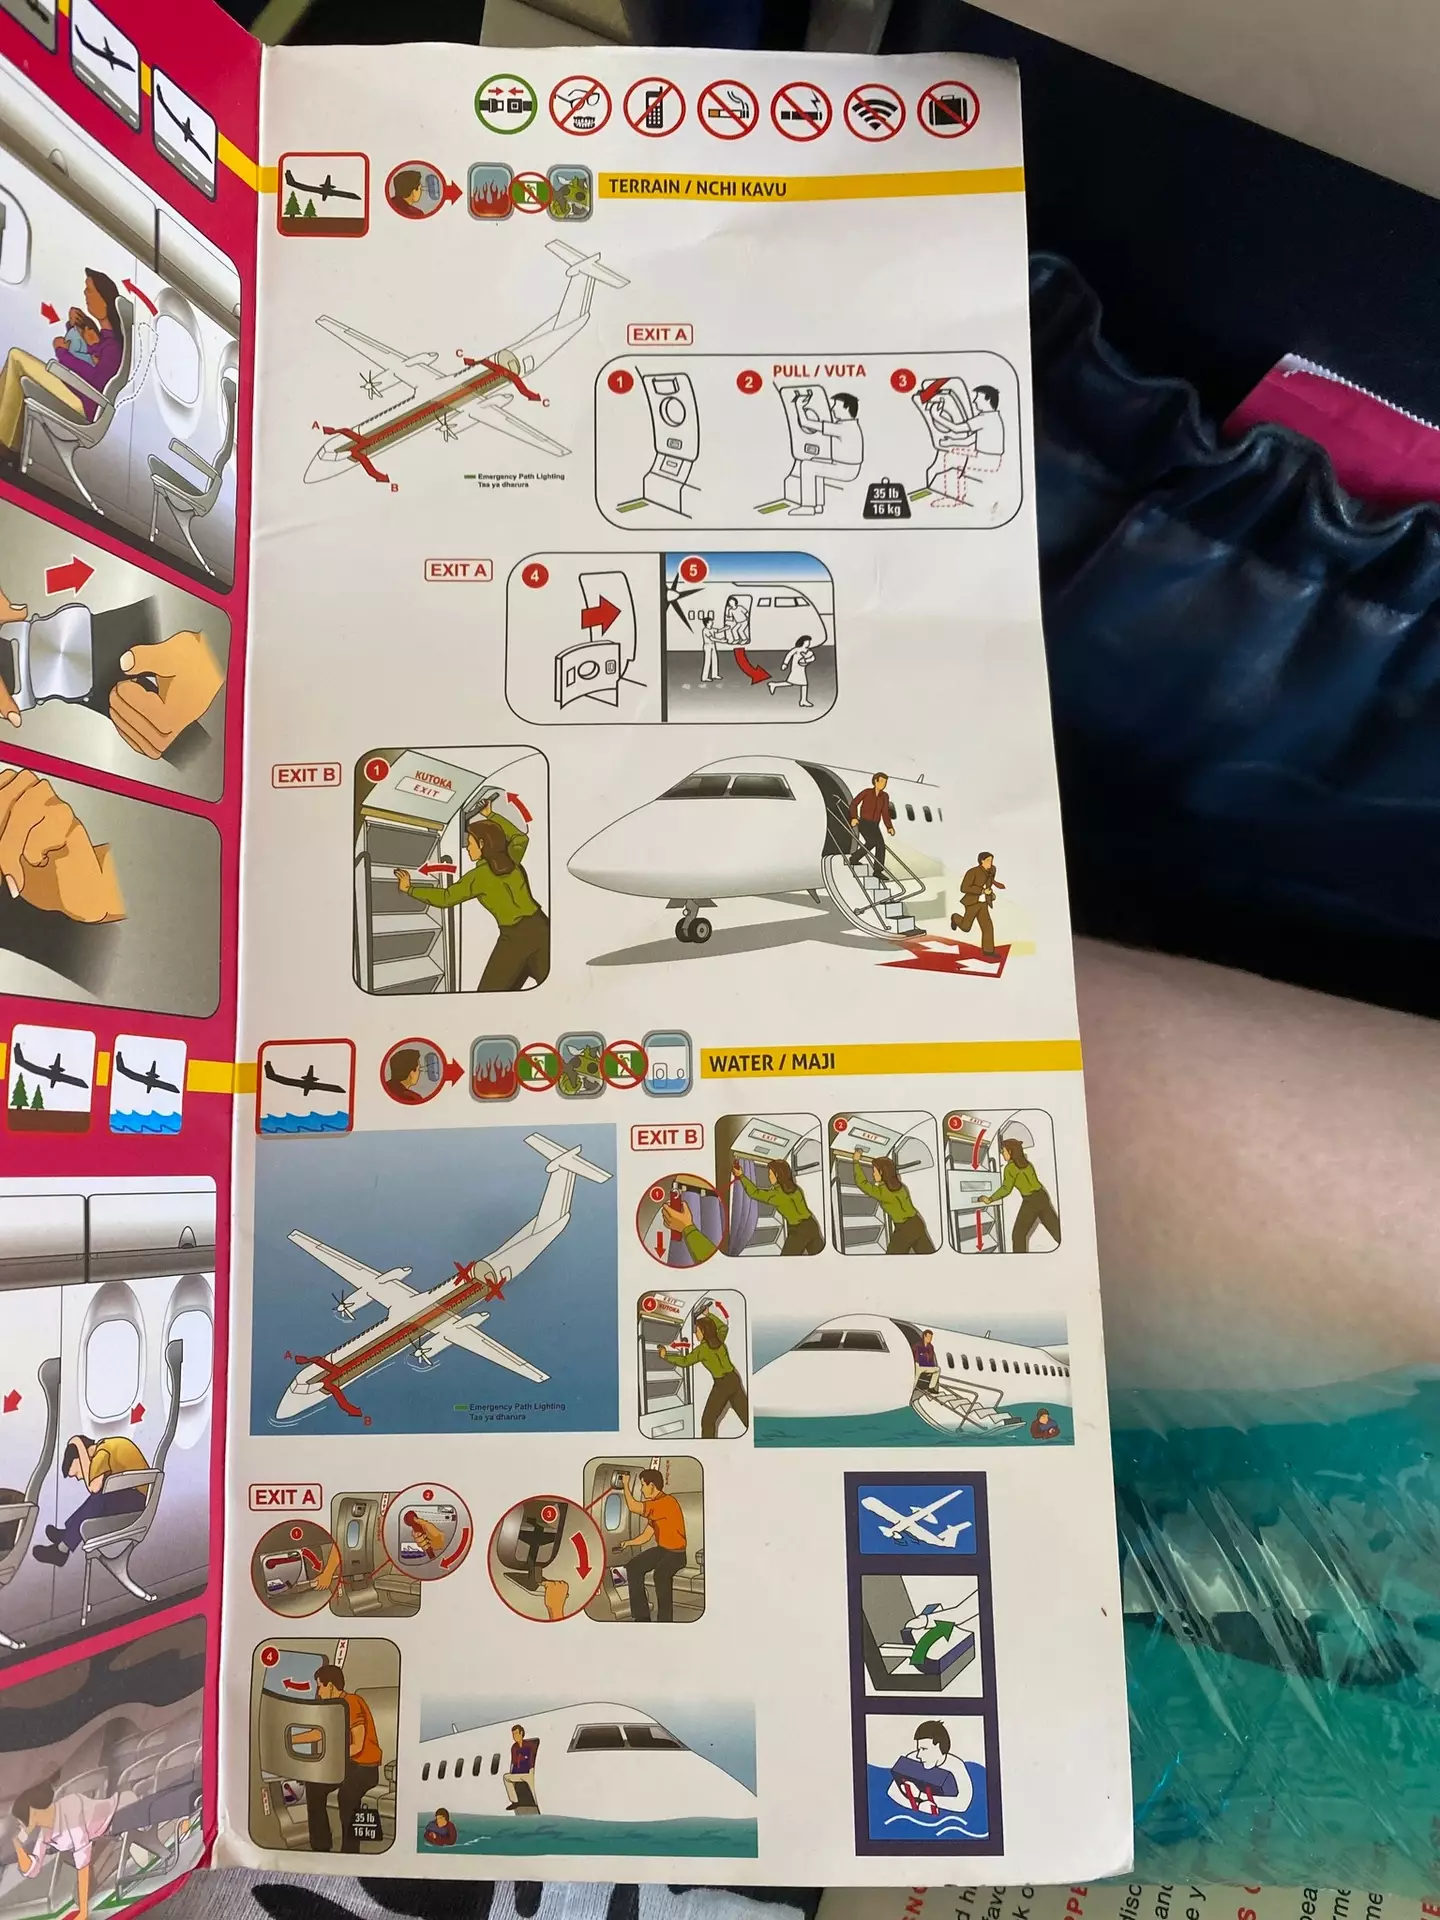 Take a look at the diagram in the bottom right to get the lowdown on how to use a flotation seat cushion (LADbible)